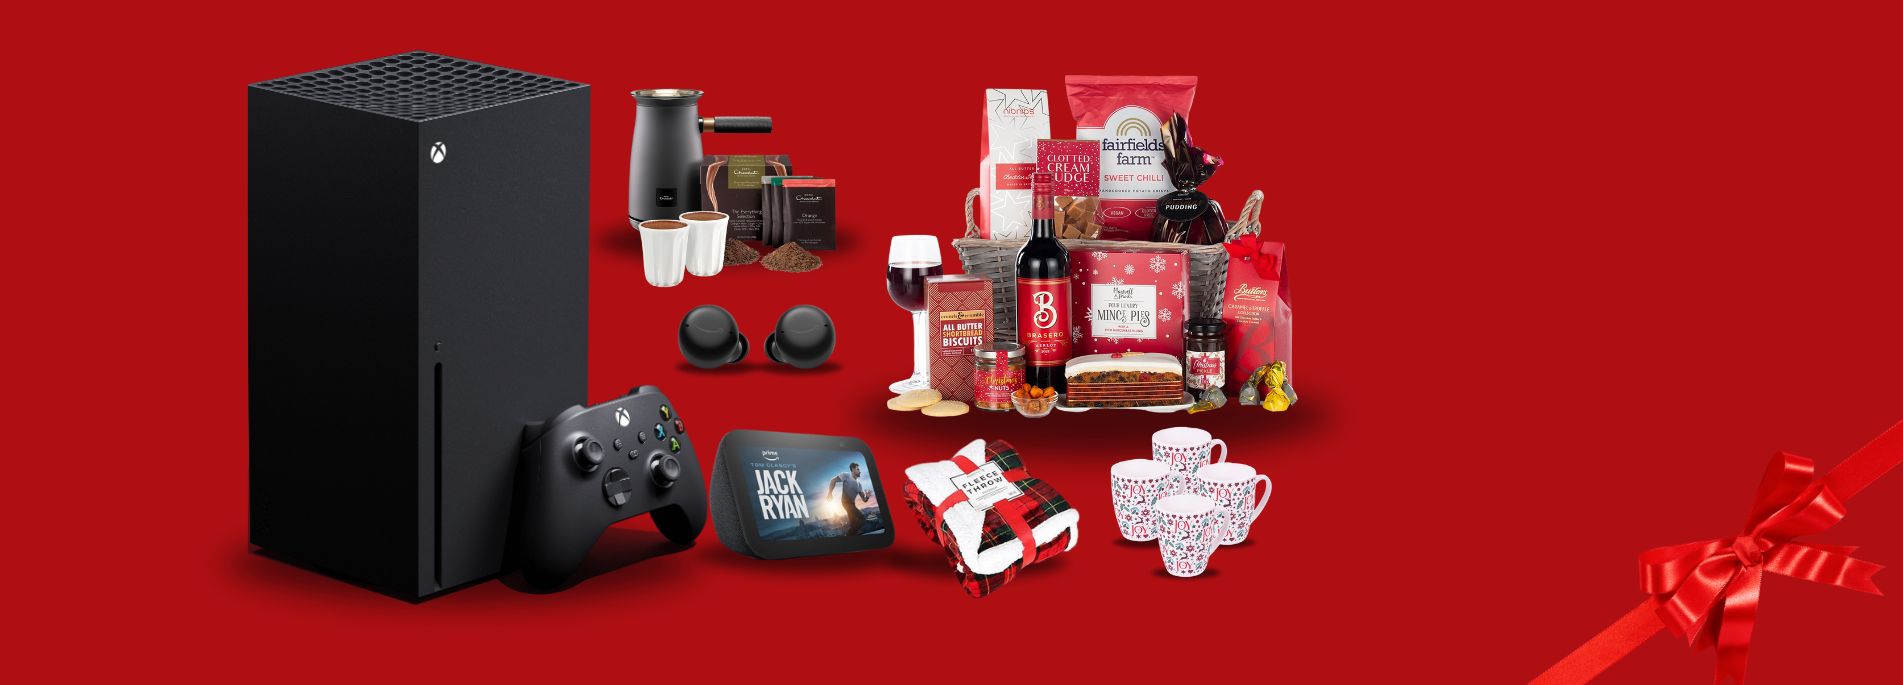 Prize Draw - Start saving this Christmas and be in with a chance to win BIG!